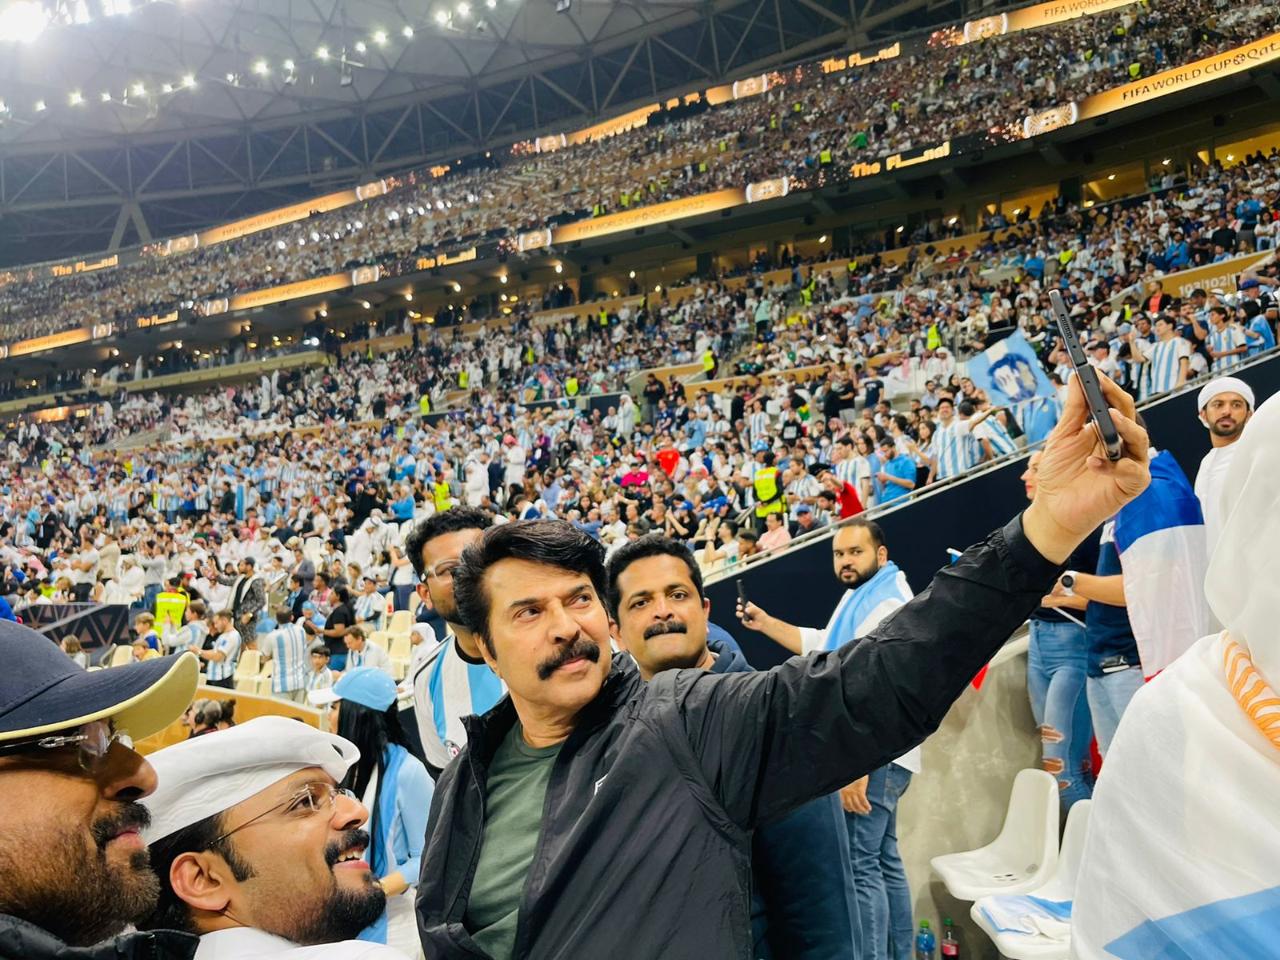 Malayalam superstar Mammootty was also at the stadium witnessing the match amidst his fans